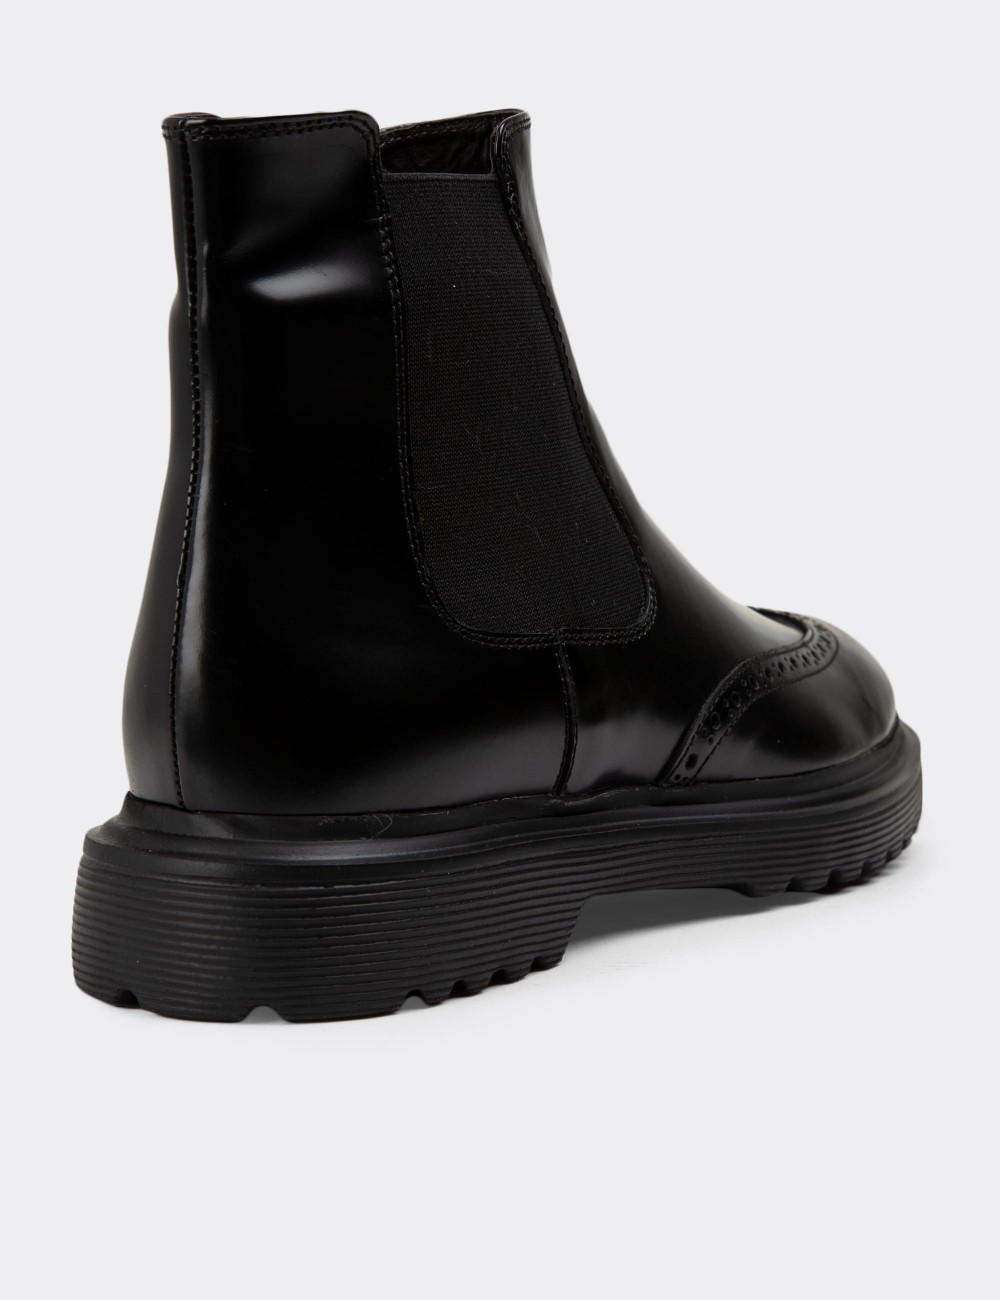 Black Leather Chelsea Boots - 01848MSYHE03